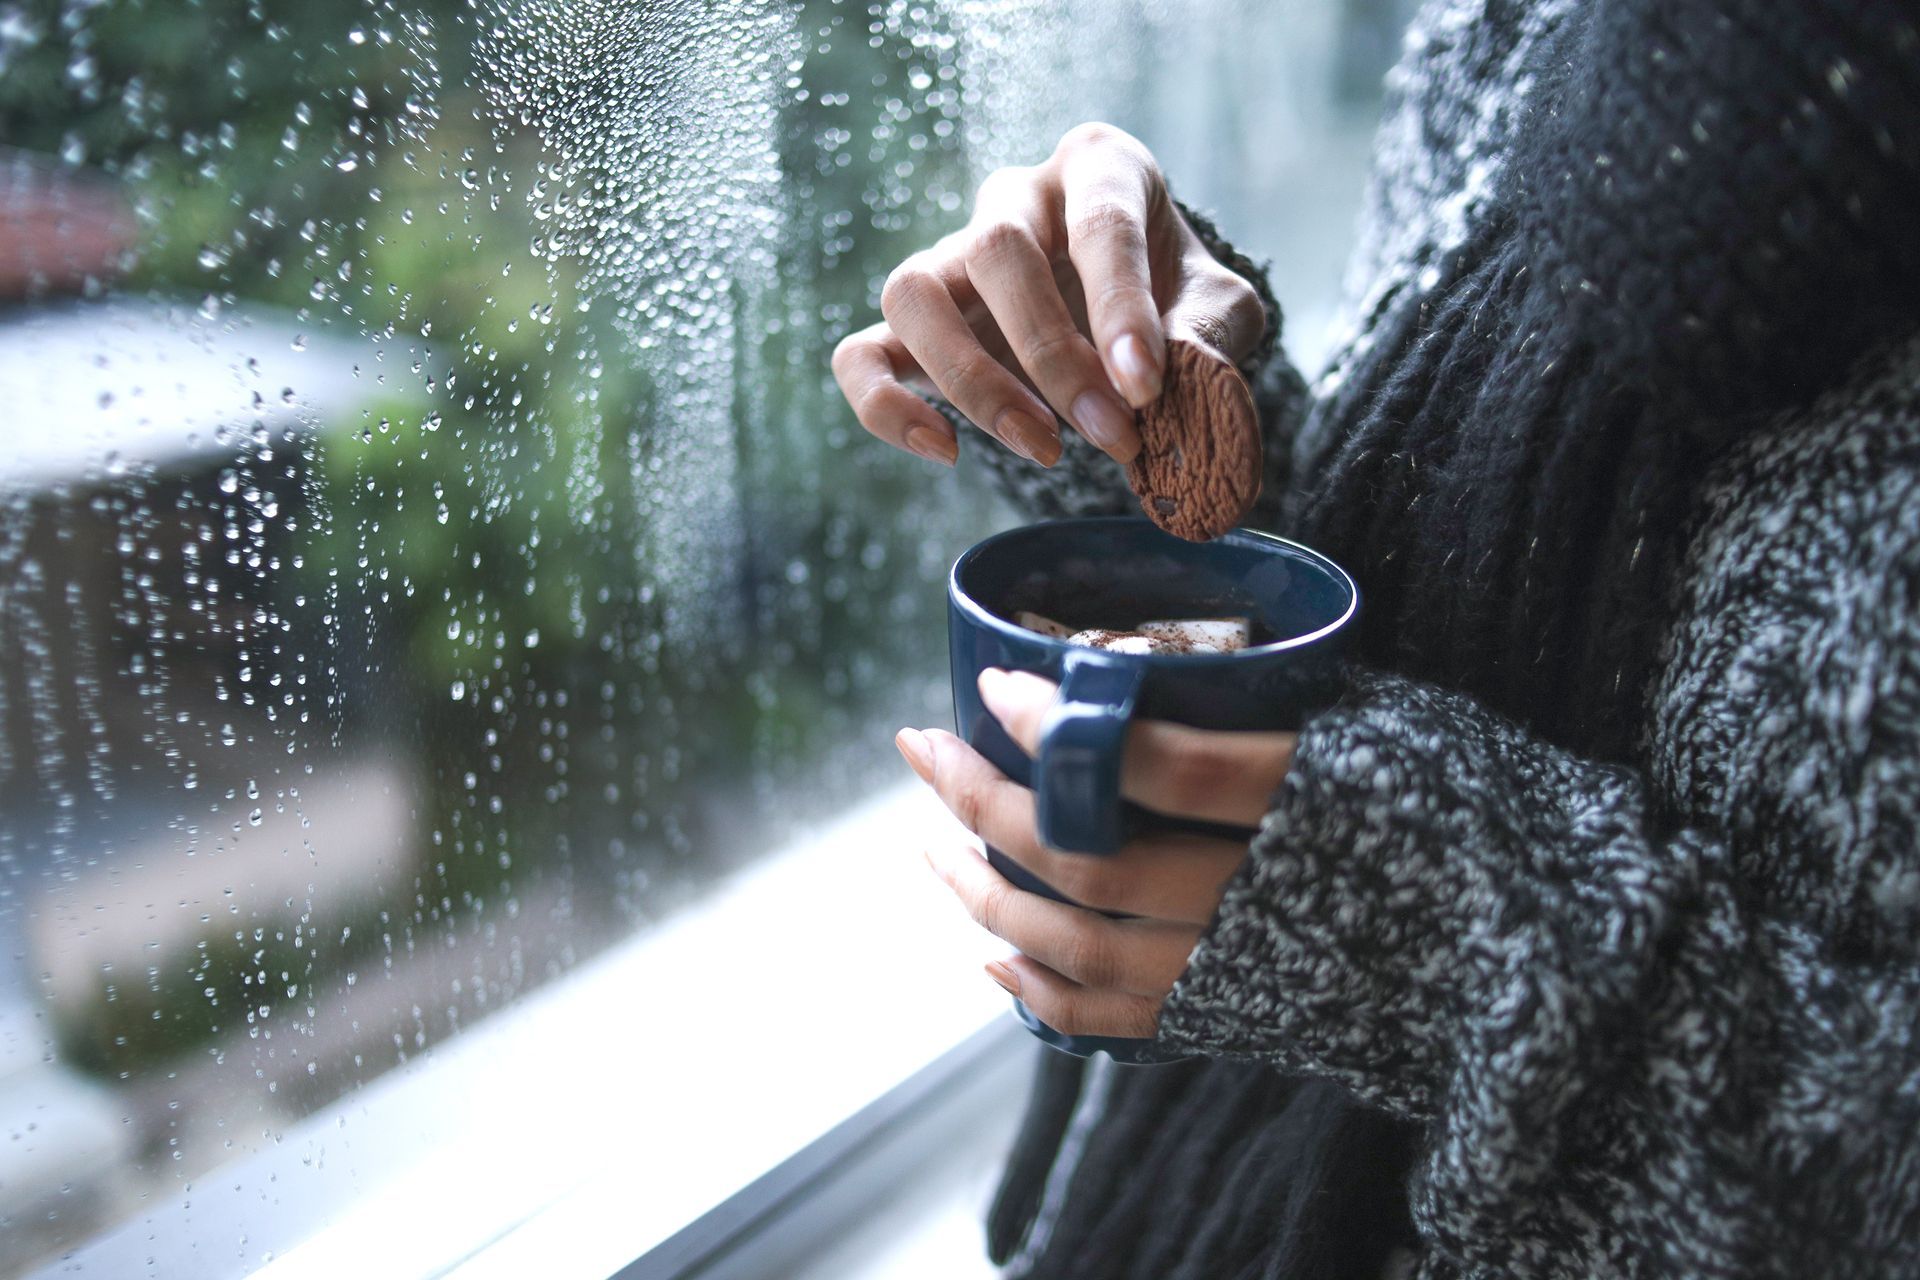 Holding cup of hot chocolate on a cold day